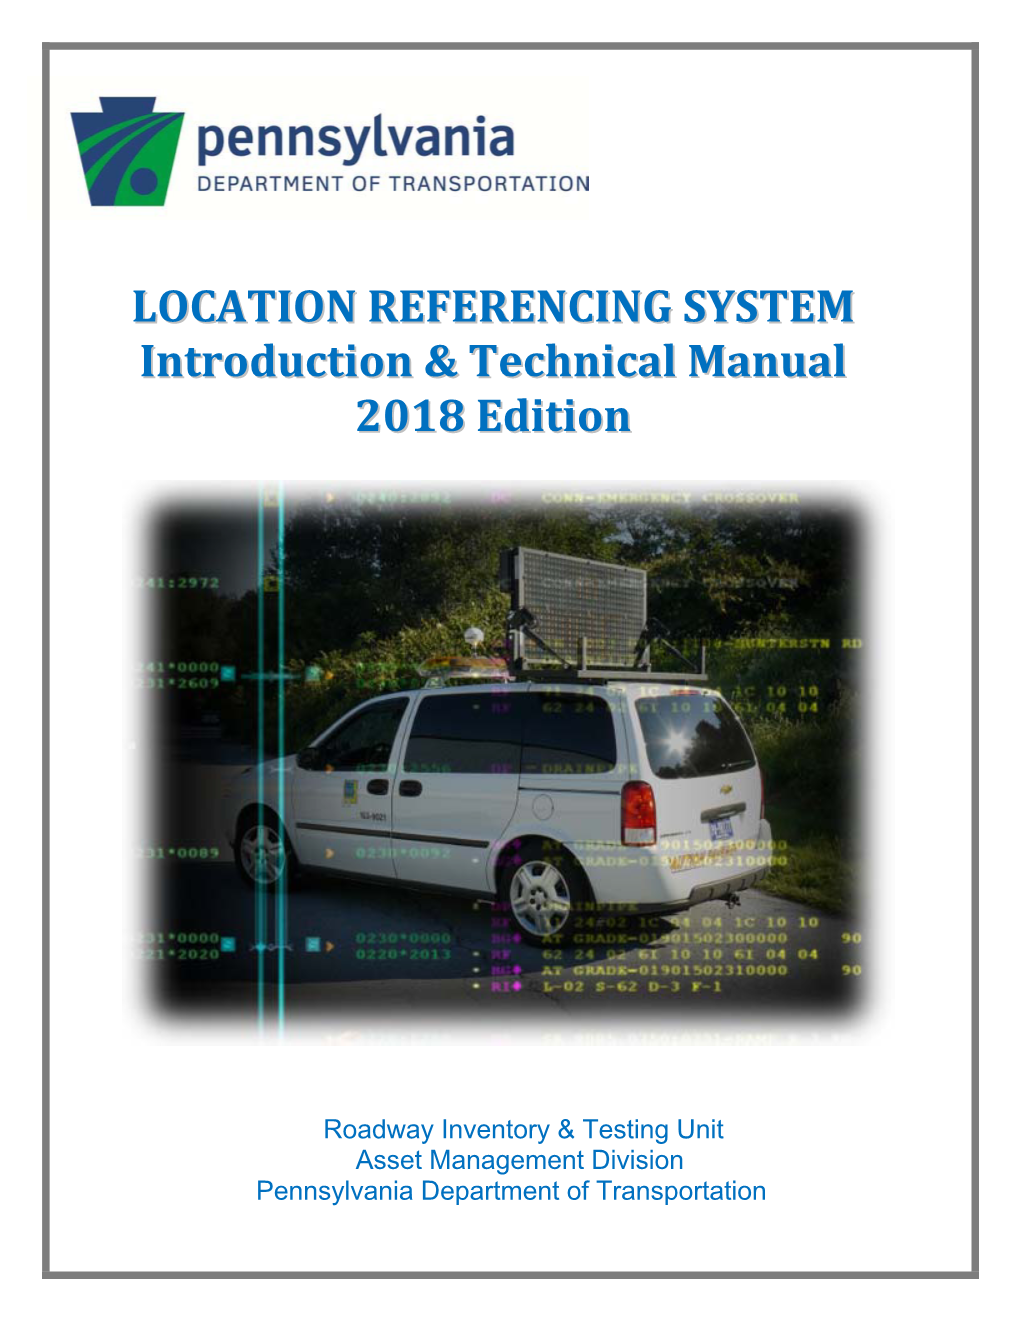 LOCATION REFERENCING SYSTEM Introduction & Technical Manual